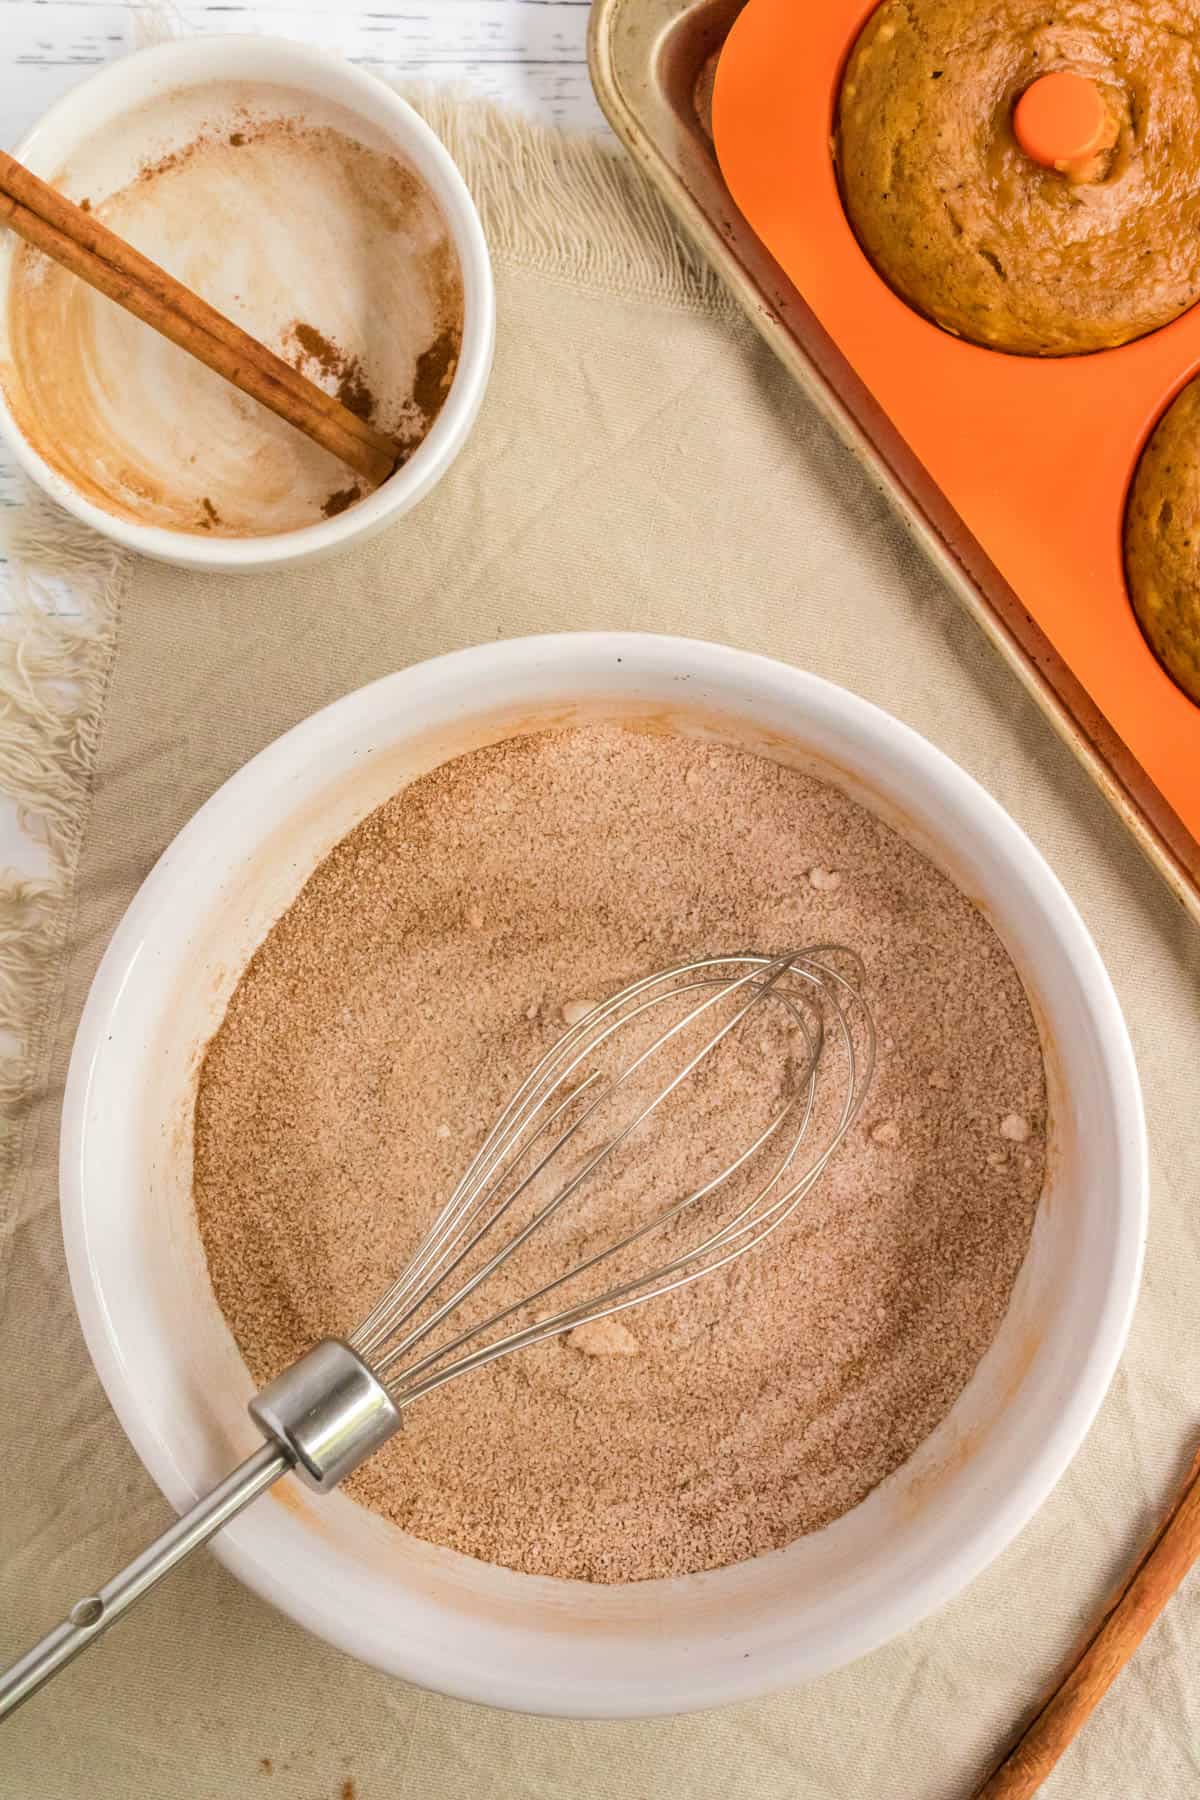 Mixing cinnamon and sugar in a bowl.